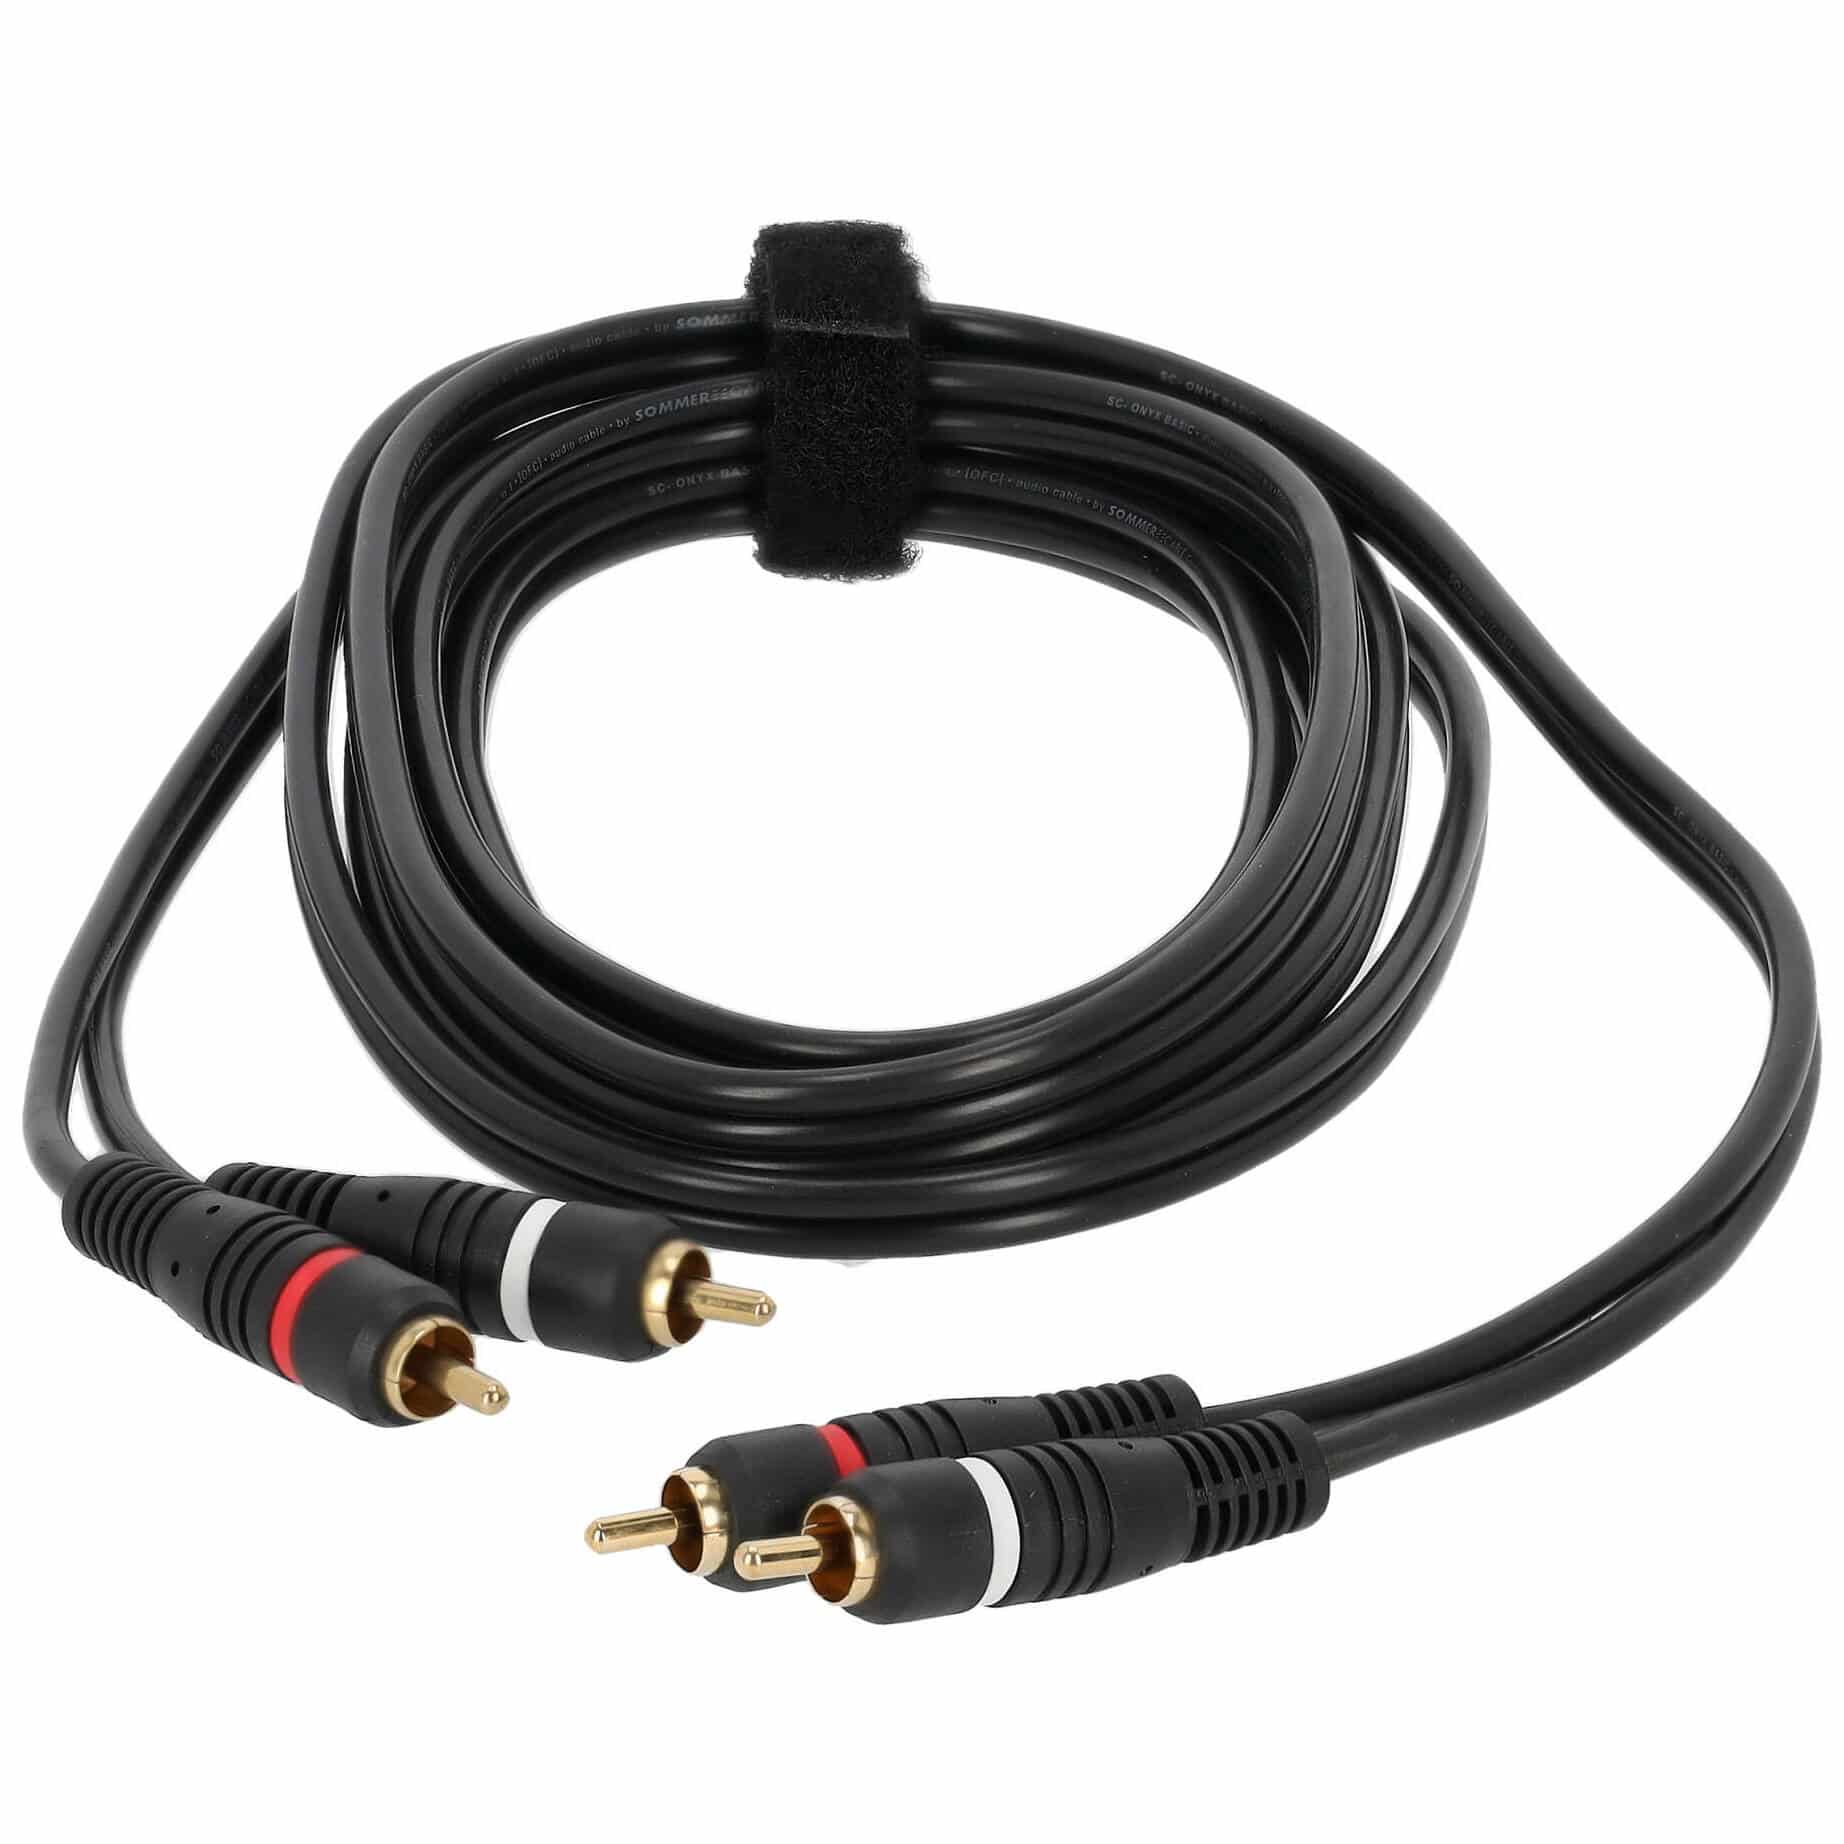 Sommer Cable BV-CICI-0300 SC-Onyx Basic 2 x Cinch Male - 2 x Cinch Male 3 Meter 1